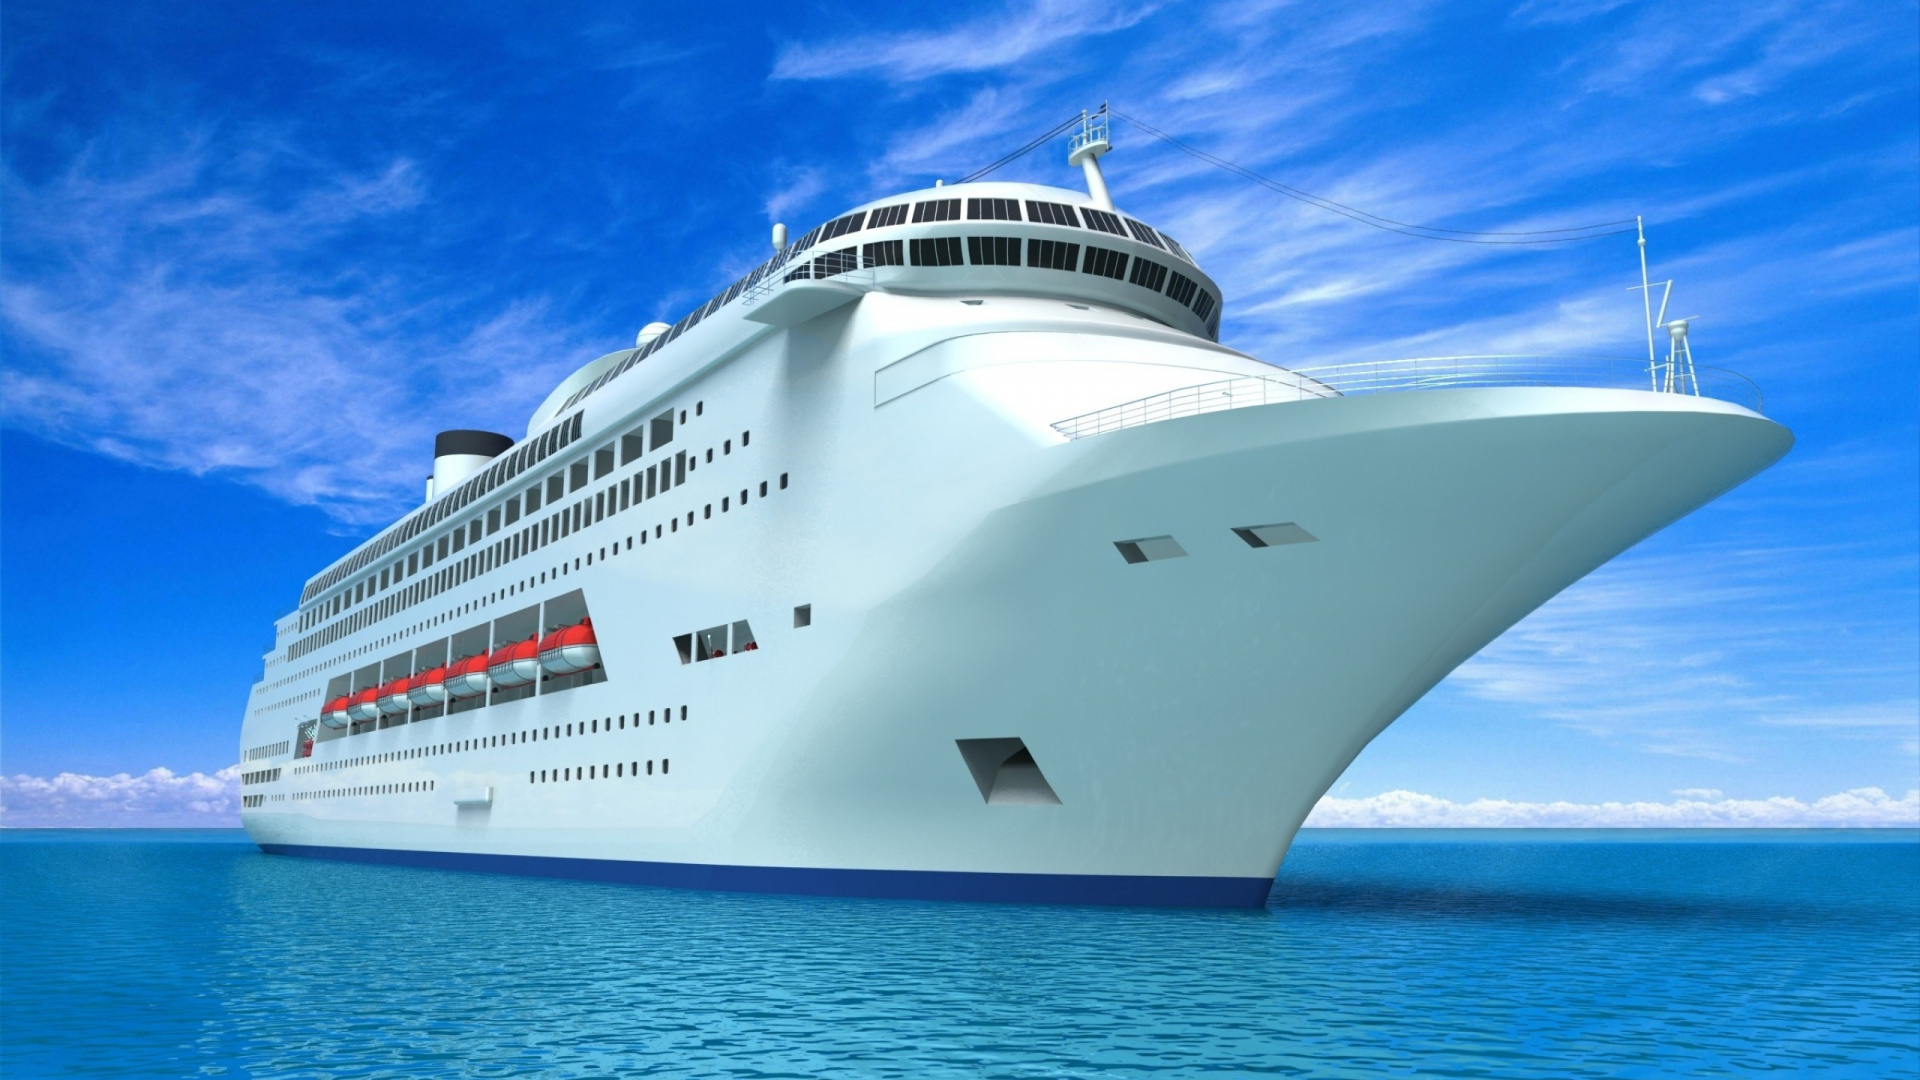 White Cruise Ship on Sea Under Blue Sky During Daytime. Wallpaper in 1920x1080 Resolution